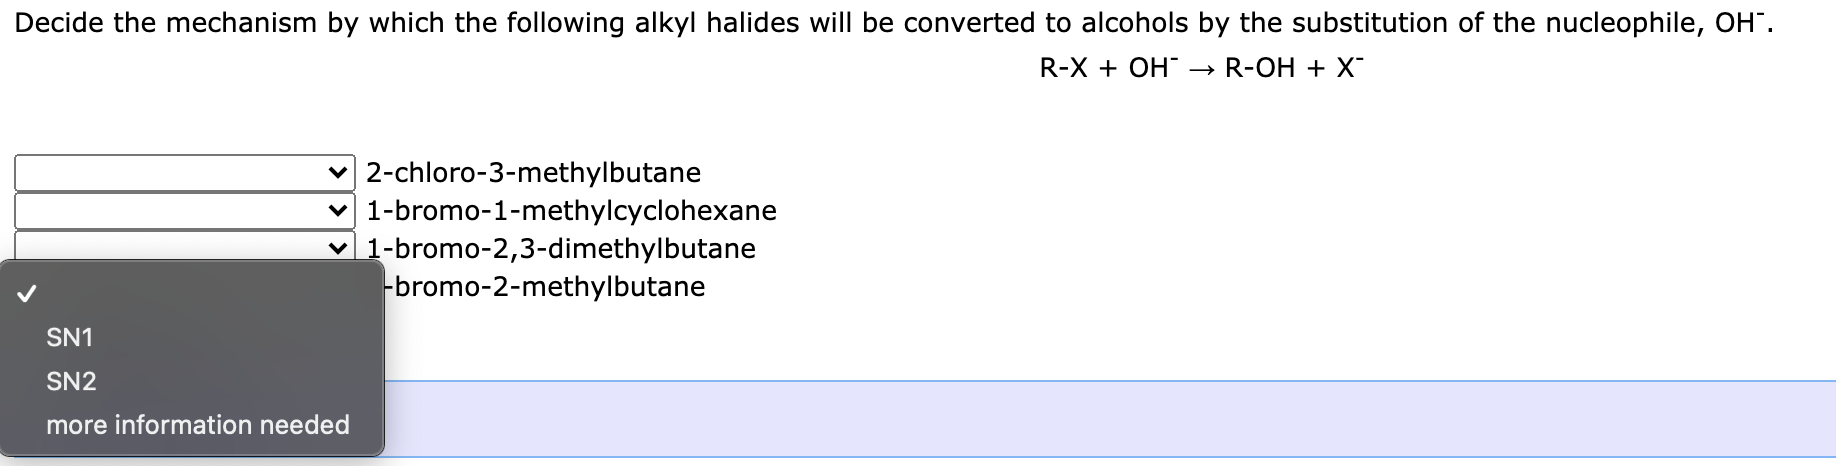 Decide the mechanism by which the following alkyl halides will be converted to alcohols by the substitution of the nucleophil